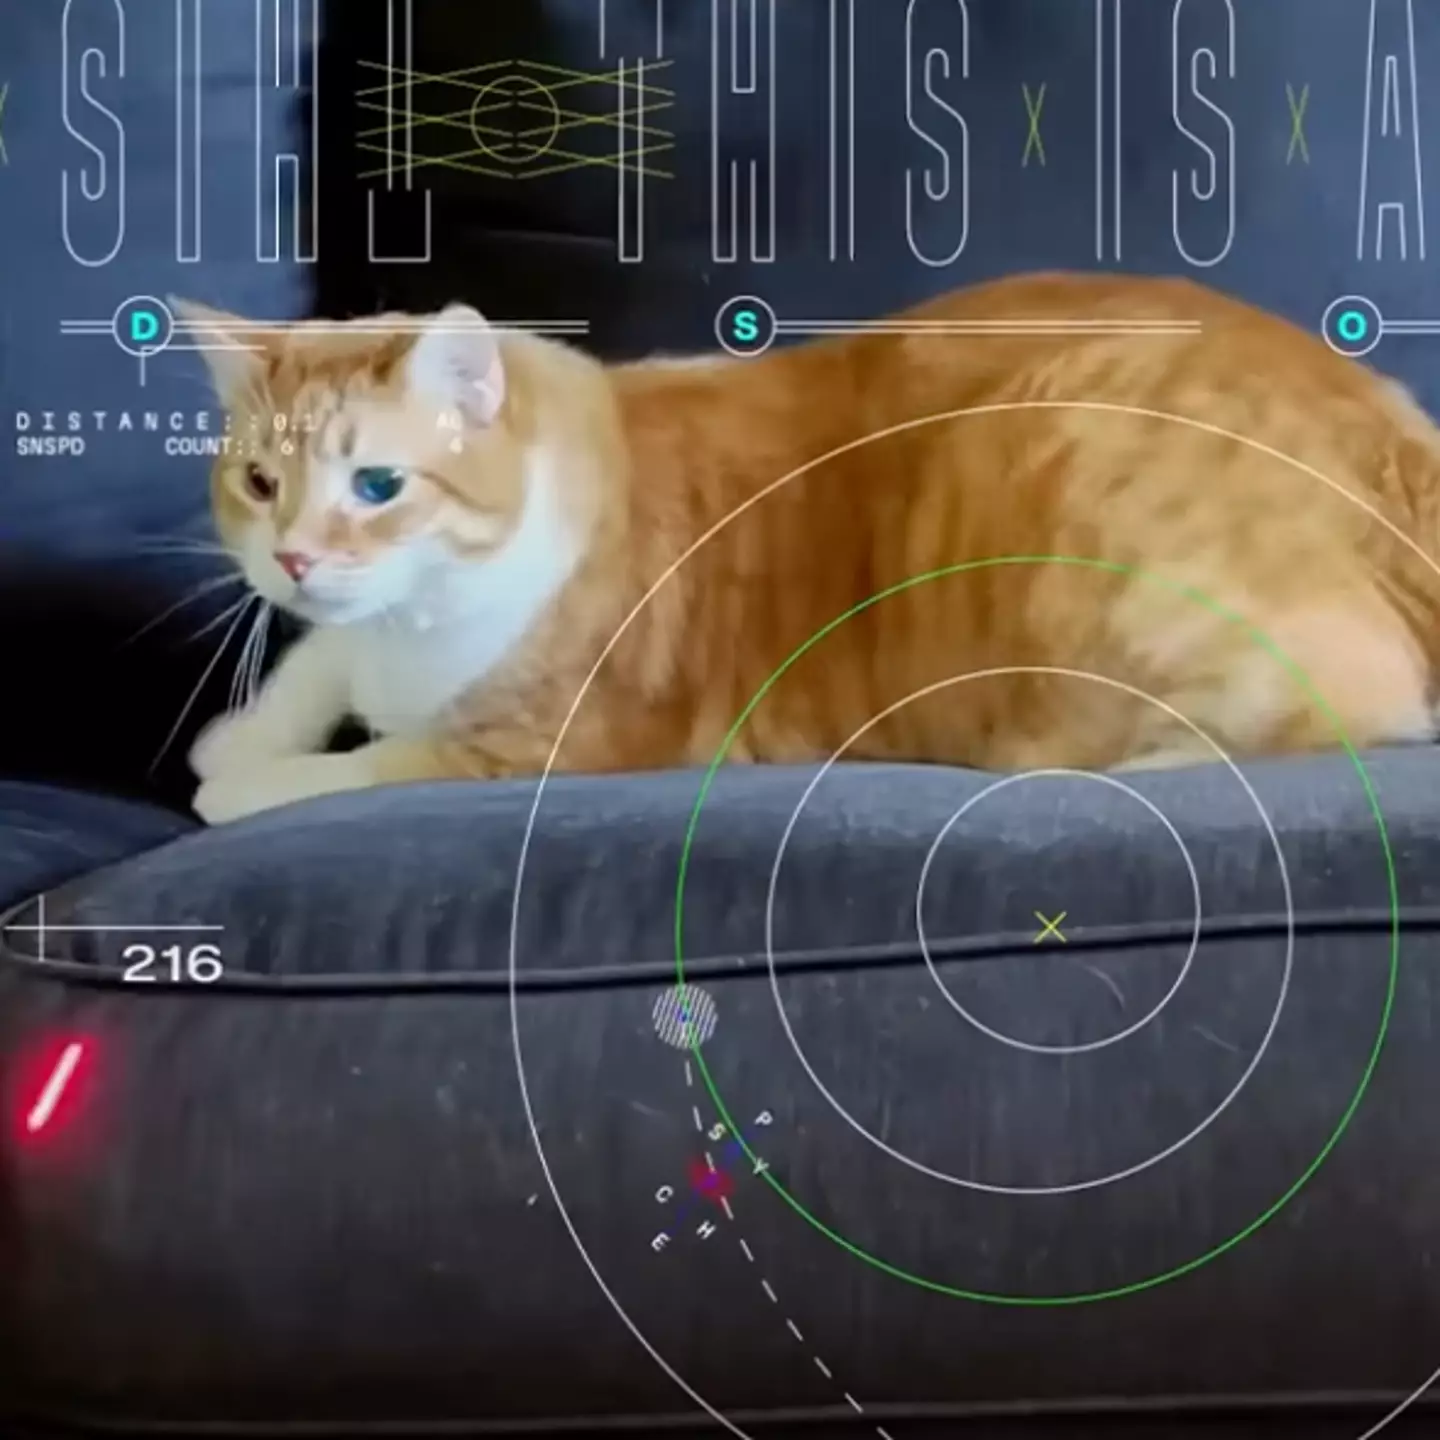 How Earth received laser-beamed cat video from 19 million miles away